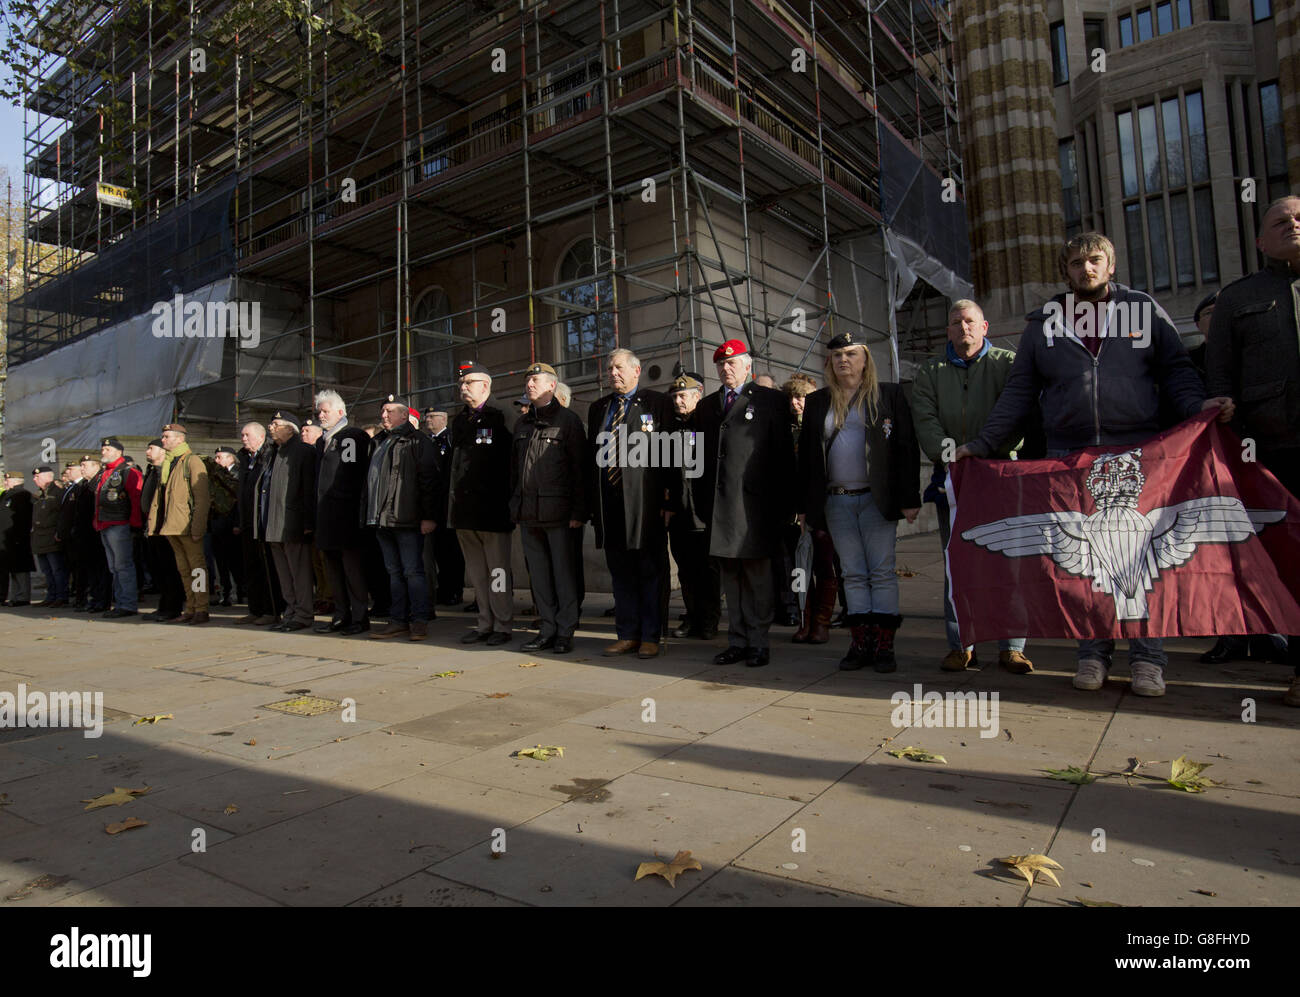 Campaigners demanding immunity for Bloody Sunday soldiers observe a two-minute silence at the Cenotaph in central London during a protest against the police investigation into the former paratroopers who killed 14 civil rights demonstrators in Londonderry in 1972. Stock Photo